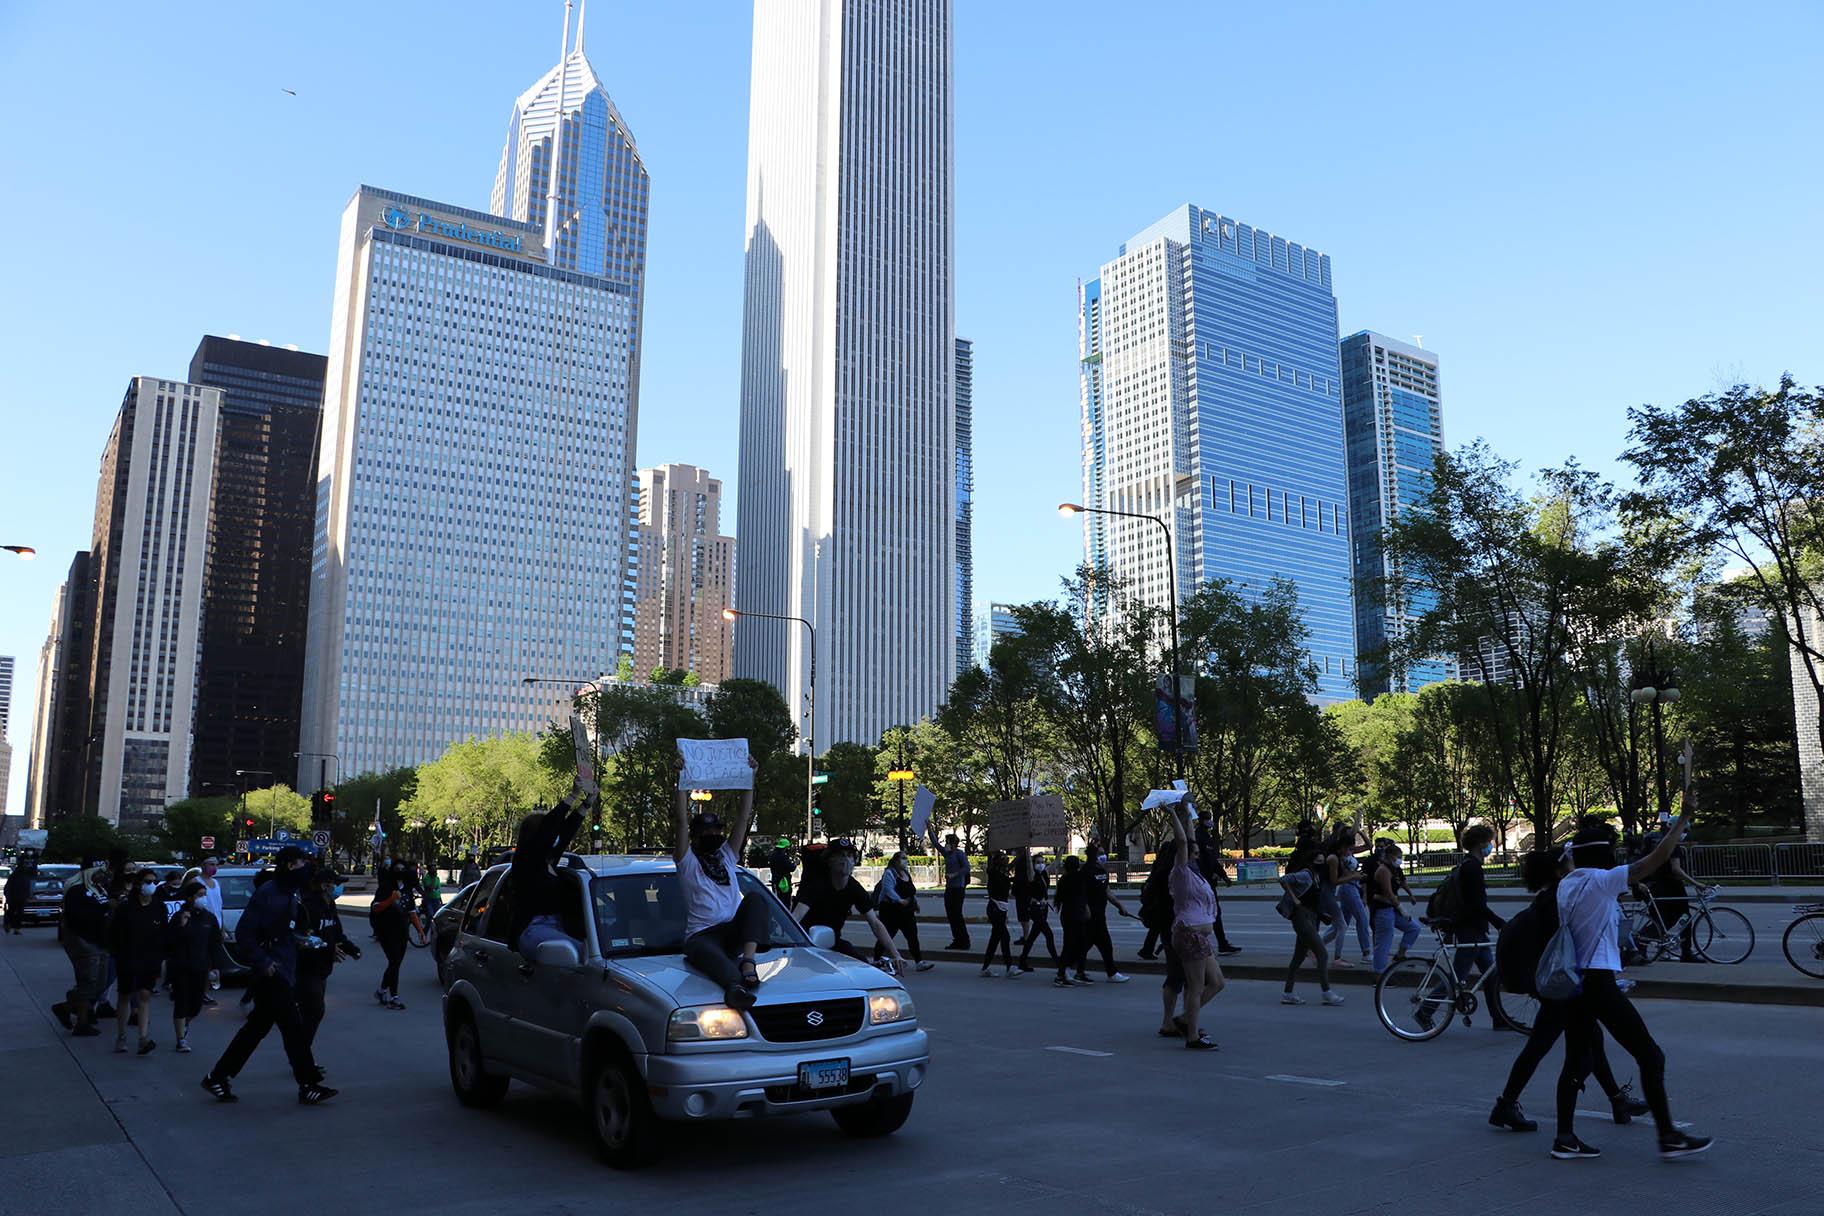 Protesters on foot and in vehicles move southward on Michigan Avenue during protests Saturday in response to the death of George Floyd. (Evan Garcia / WTTW News)